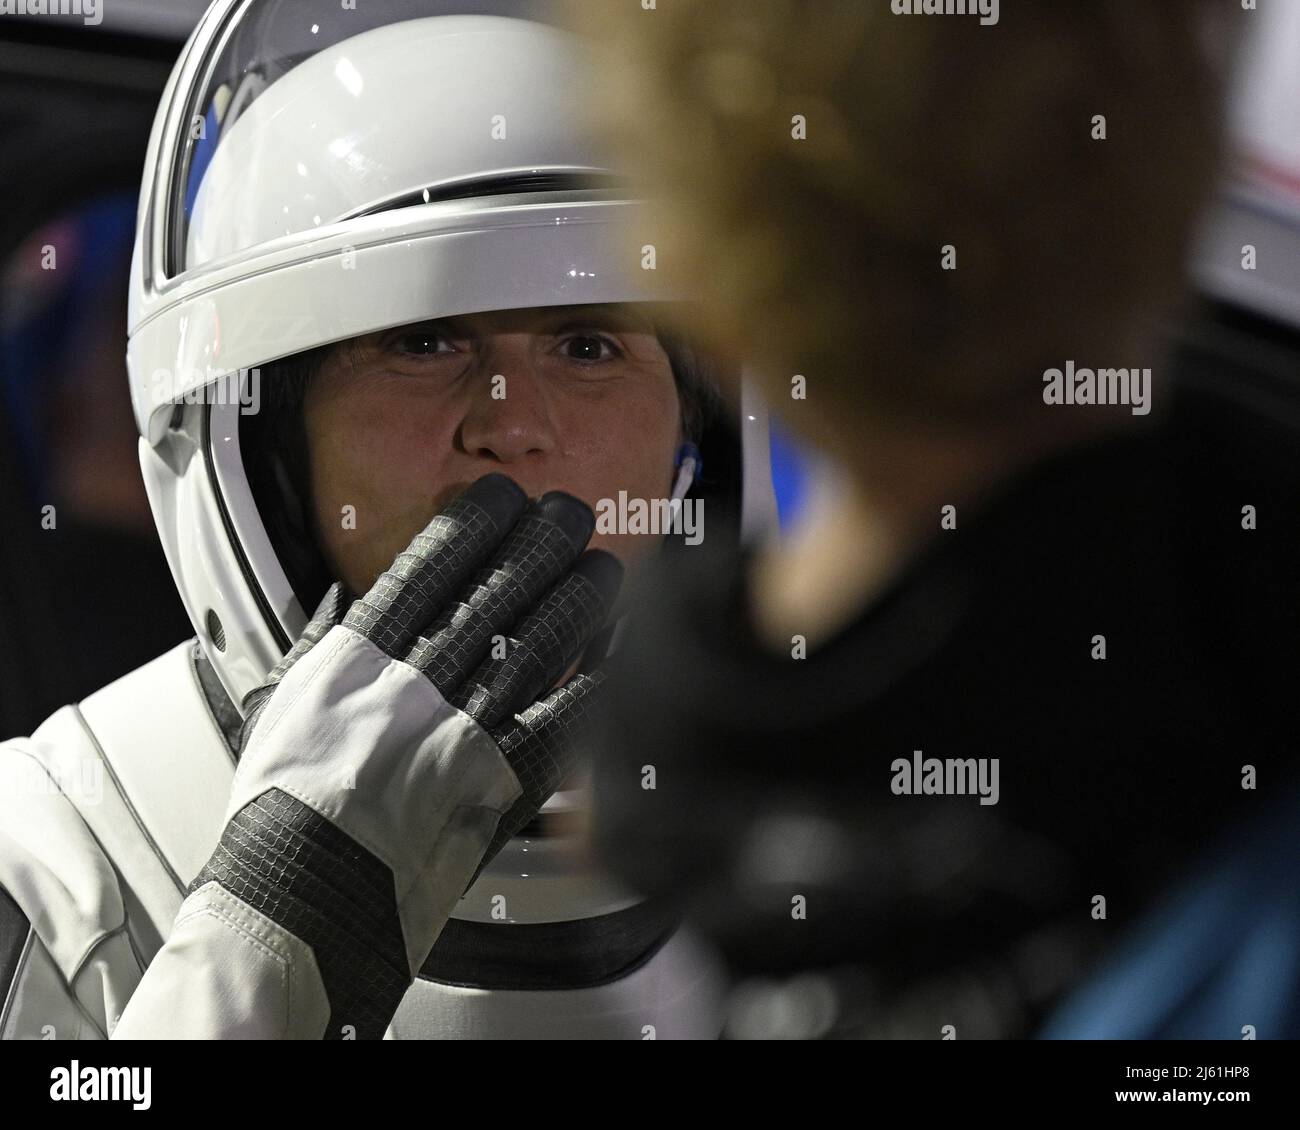 ESA Astronaut Samantha Cristoforetti, throws a kiss to family members after walking out of the Neil Armstrong O&C Building at the the Kennedy Space Center, Florida on Wednesday, April 27, 2022. Photo by Joe Marino/UPI Credit: UPI/Alamy Live News Stock Photo